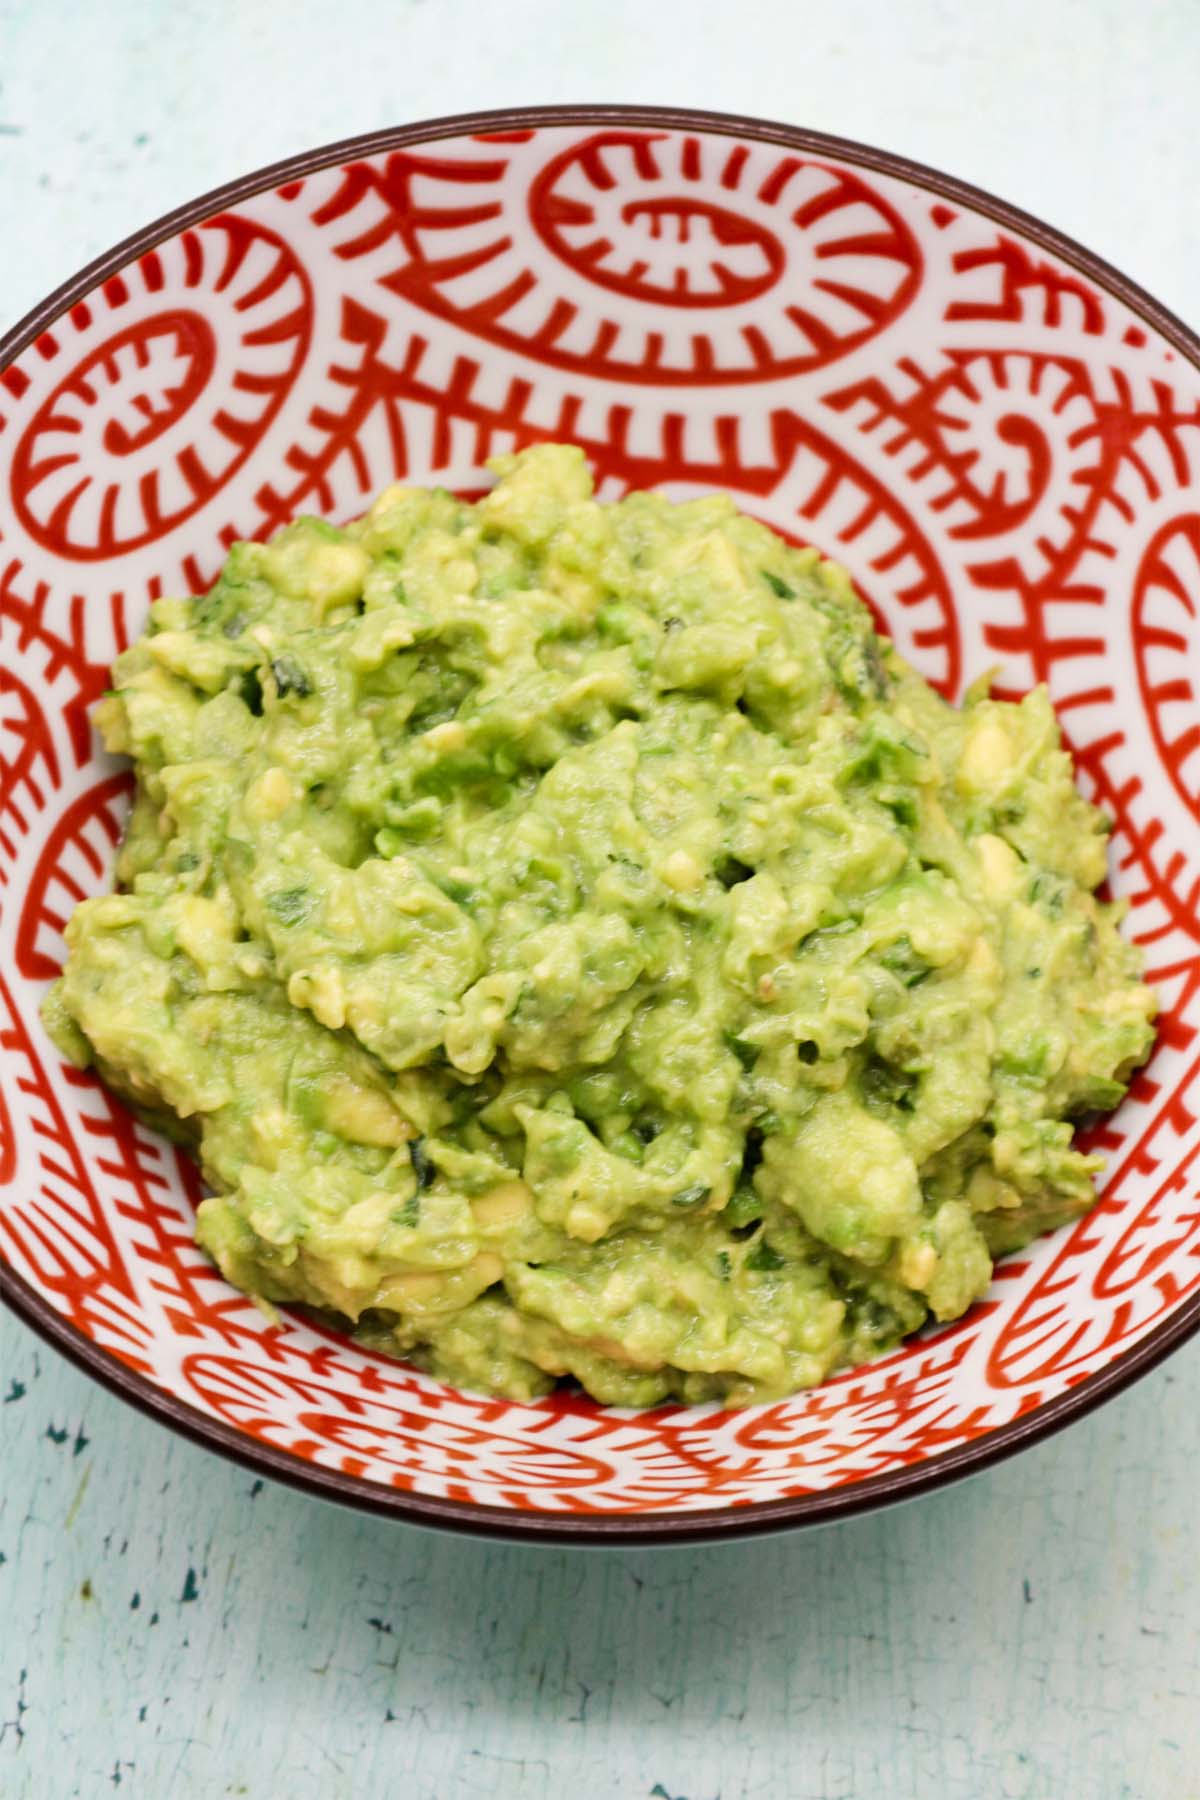 Guacamole in red and white serving bowl